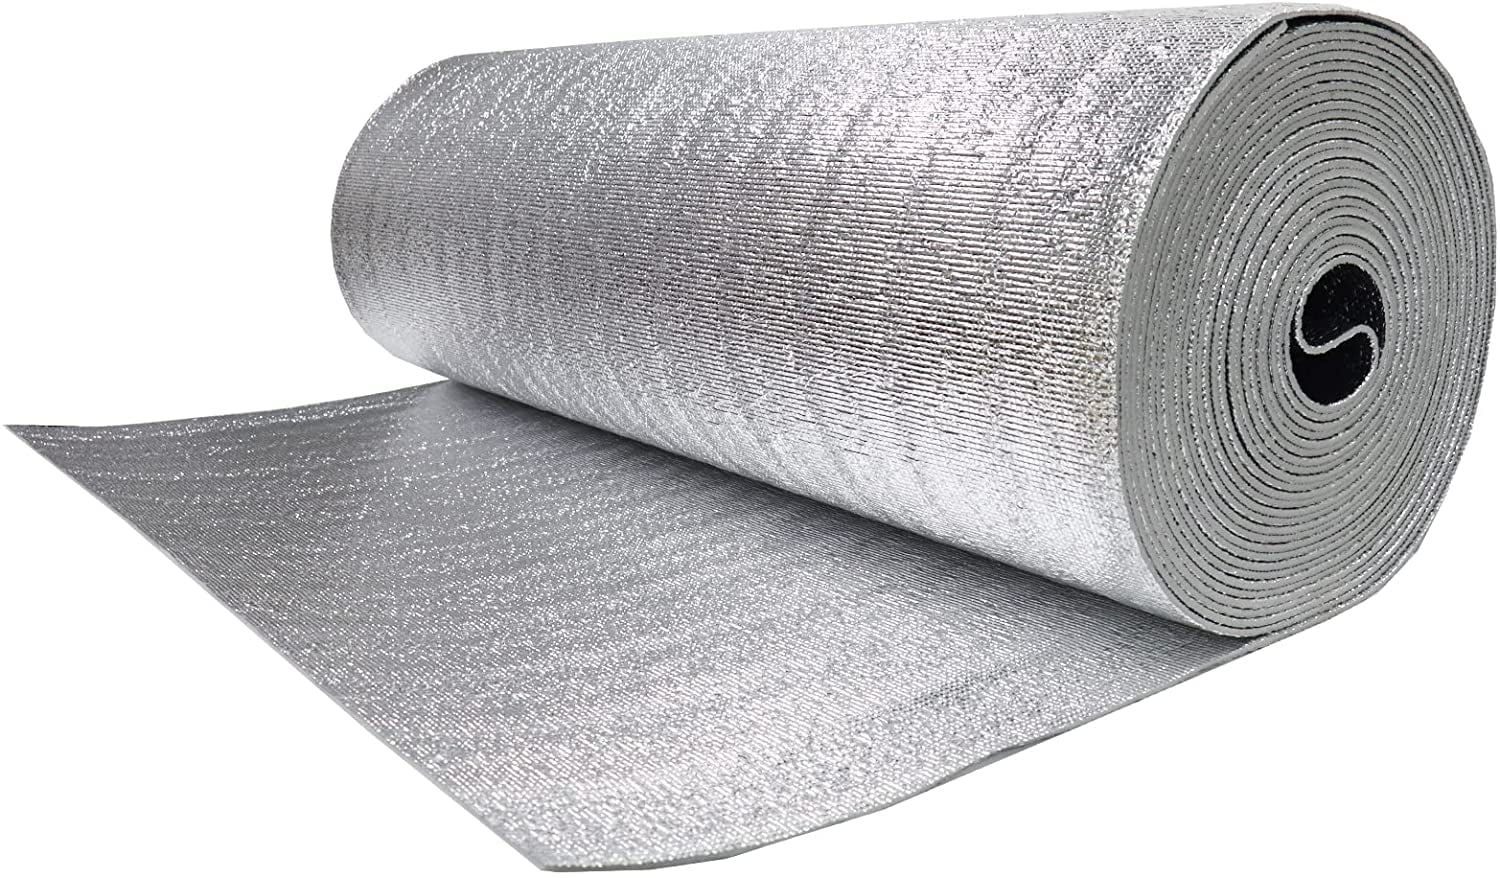 AD3 WHITE Reflective Insulation roll Foam Core Radiant Barrier 3MM 2x5 R7-21 